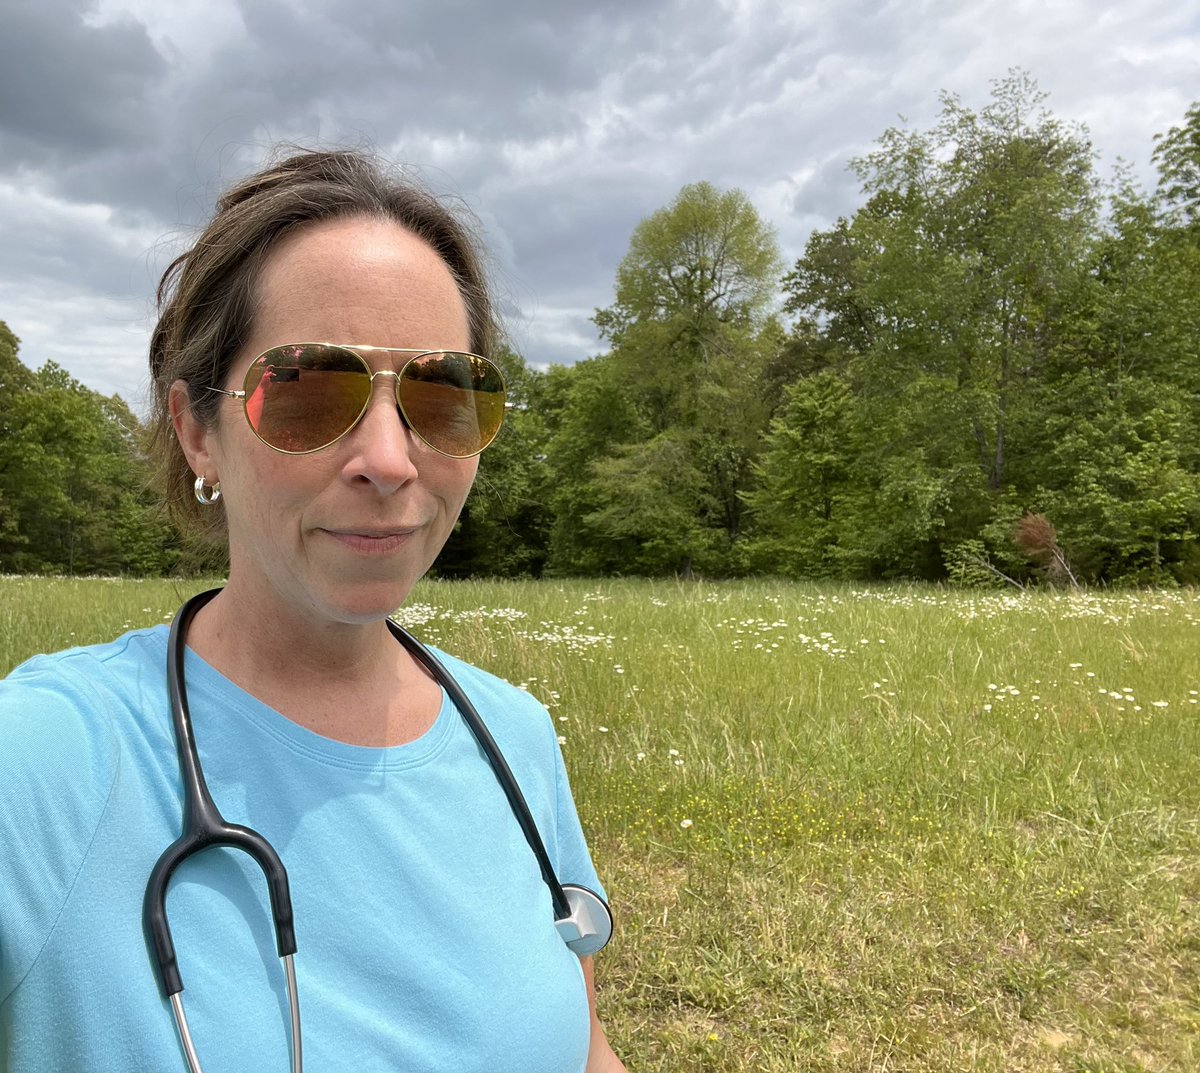 Back on the farm! No place like home. No I normally don’t wear my stethoscope while walking in the field, but Dad needs his blood pressure checked 😊